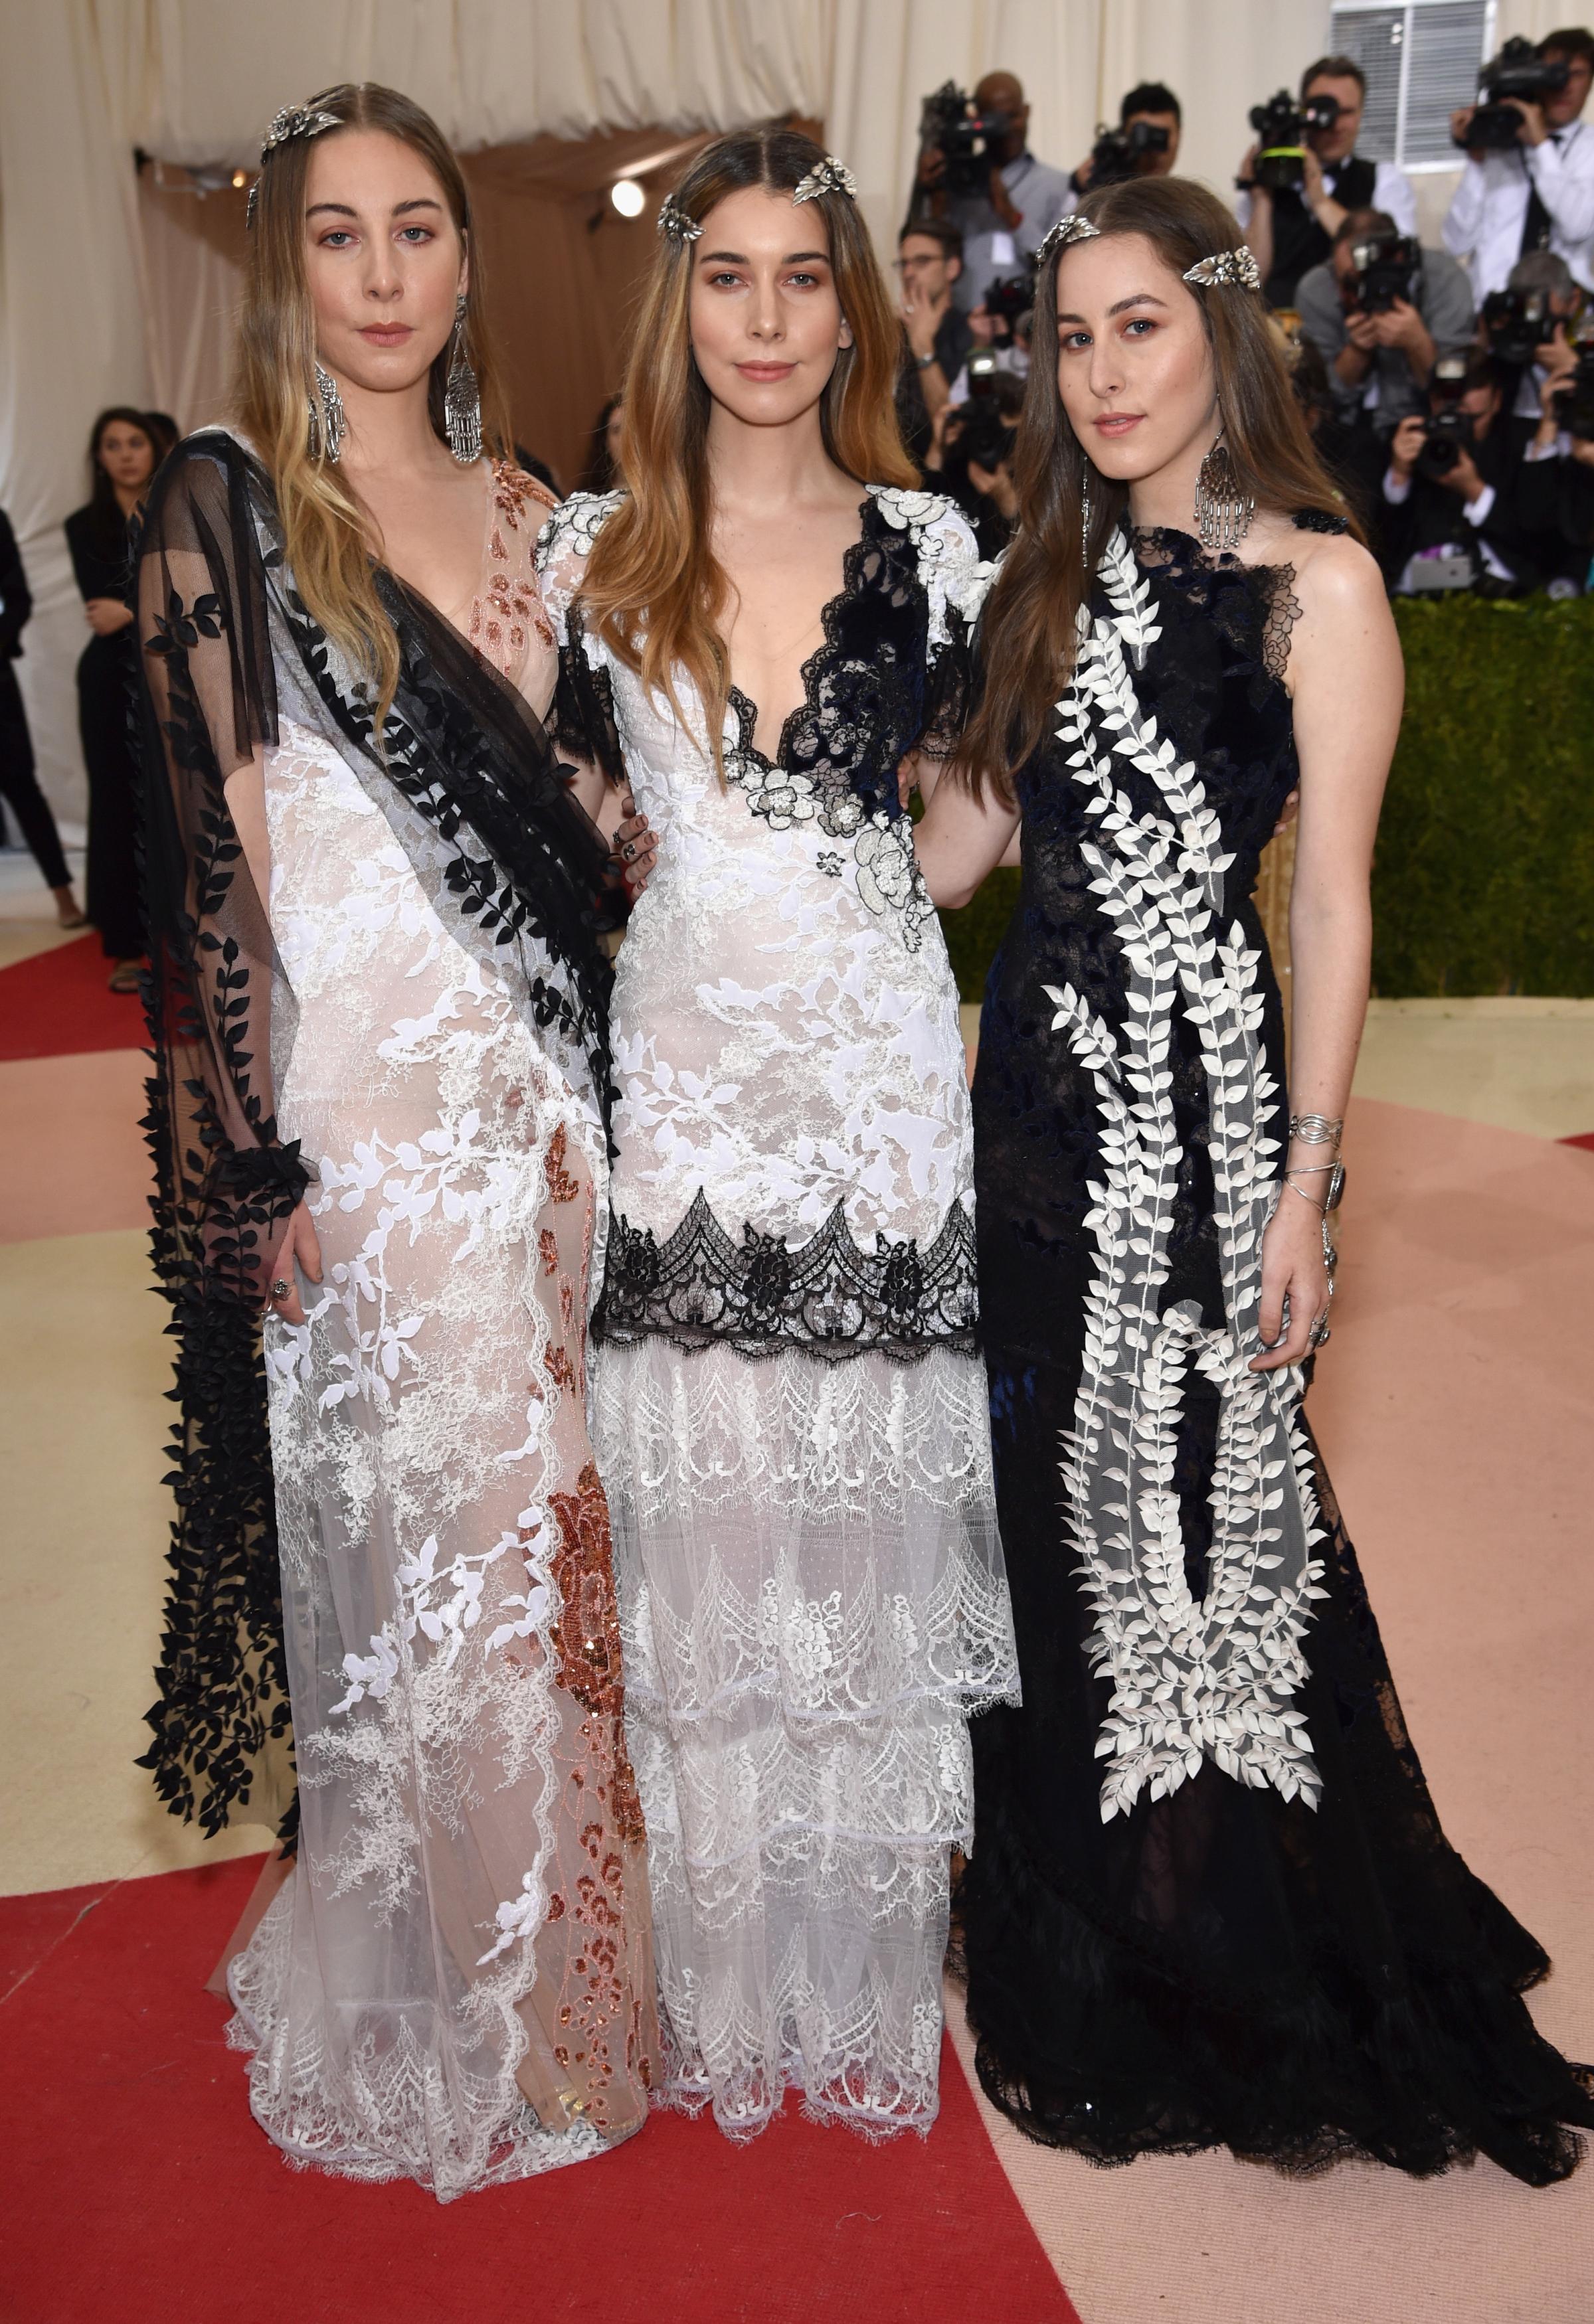 Haim attend "Manus x Machina: Fashion In An Age Of Technology" Costume Institute Gala at Metropolitan Museum of Art on May 2, 2016 in New York City.